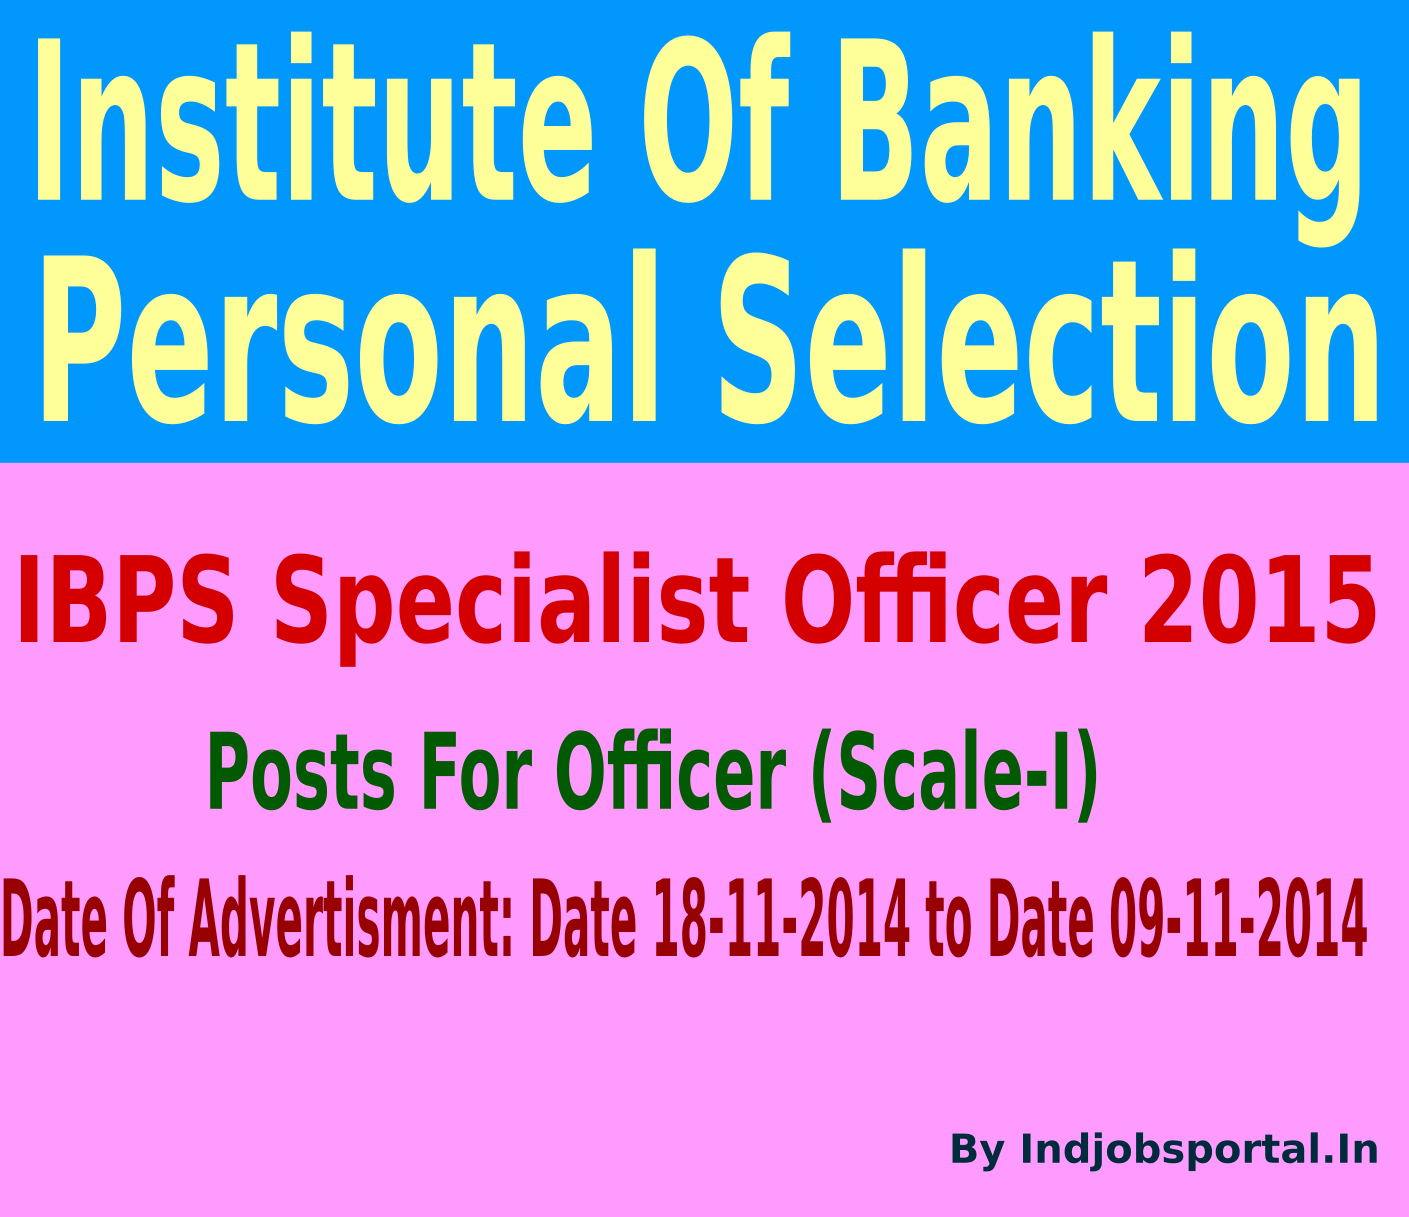 IBPS Specialist Officer 2015 Notification For Various Specialist Officer Posts